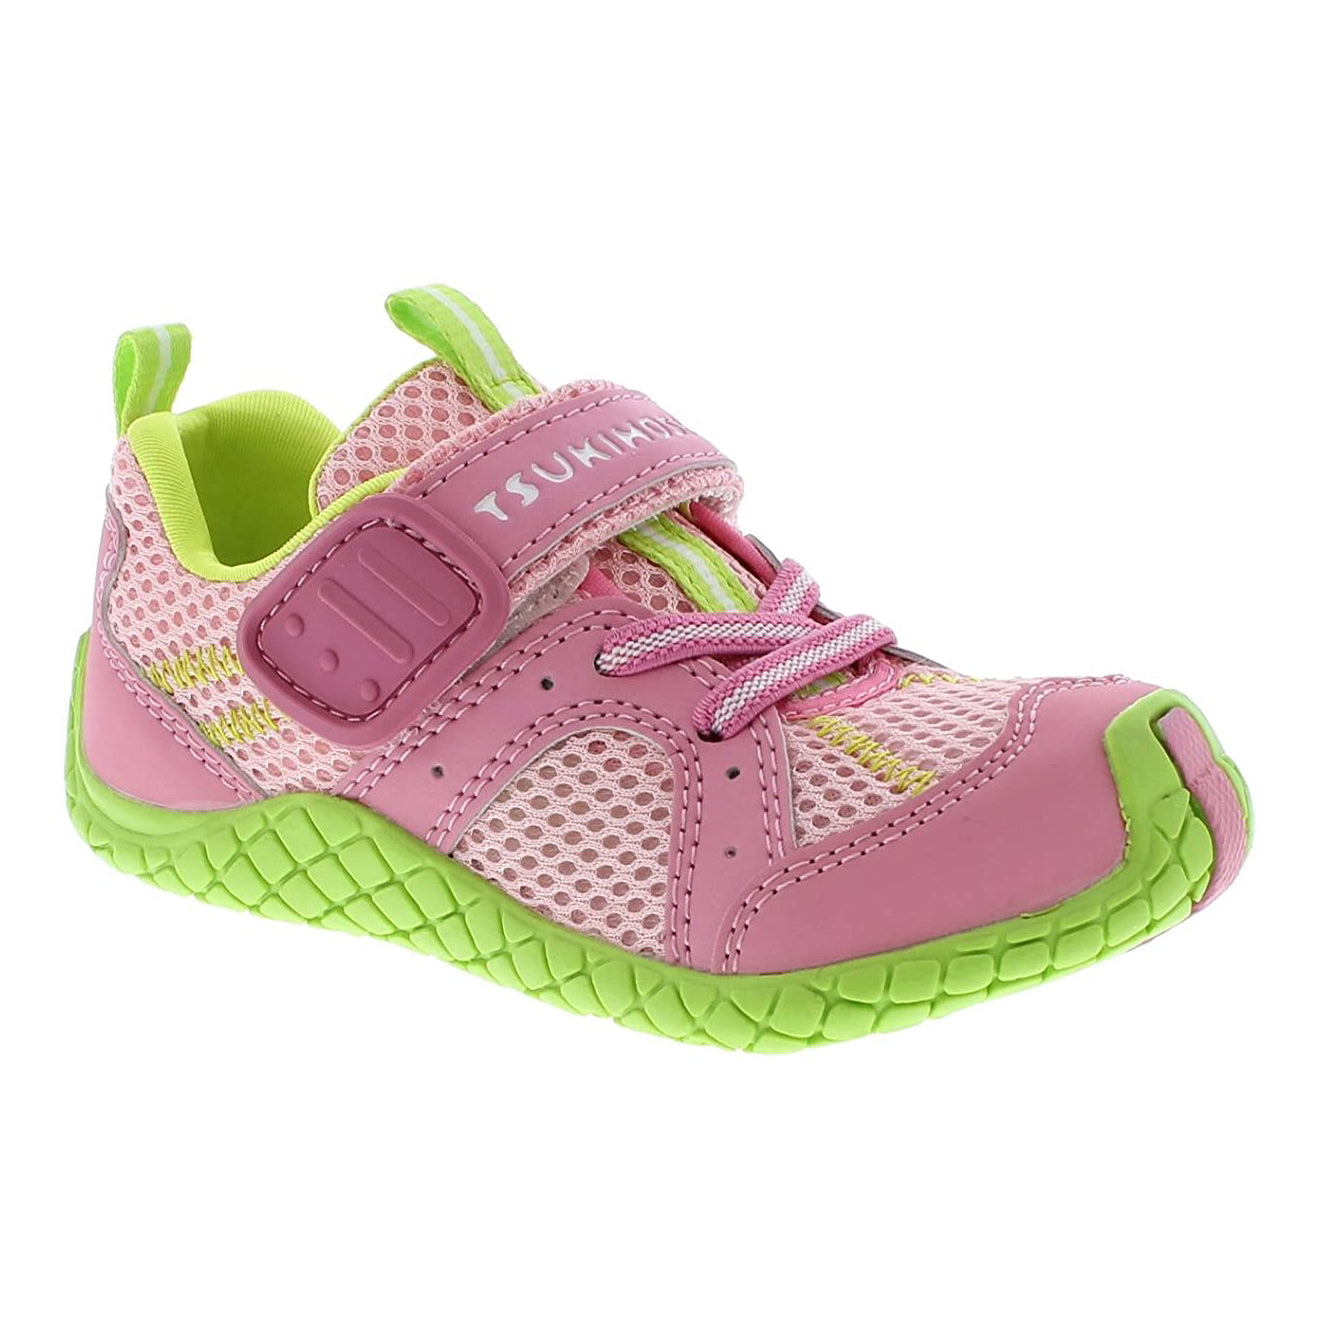 Baby Tsukihoshi Marina Sneaker in Pink/Apple from the front view